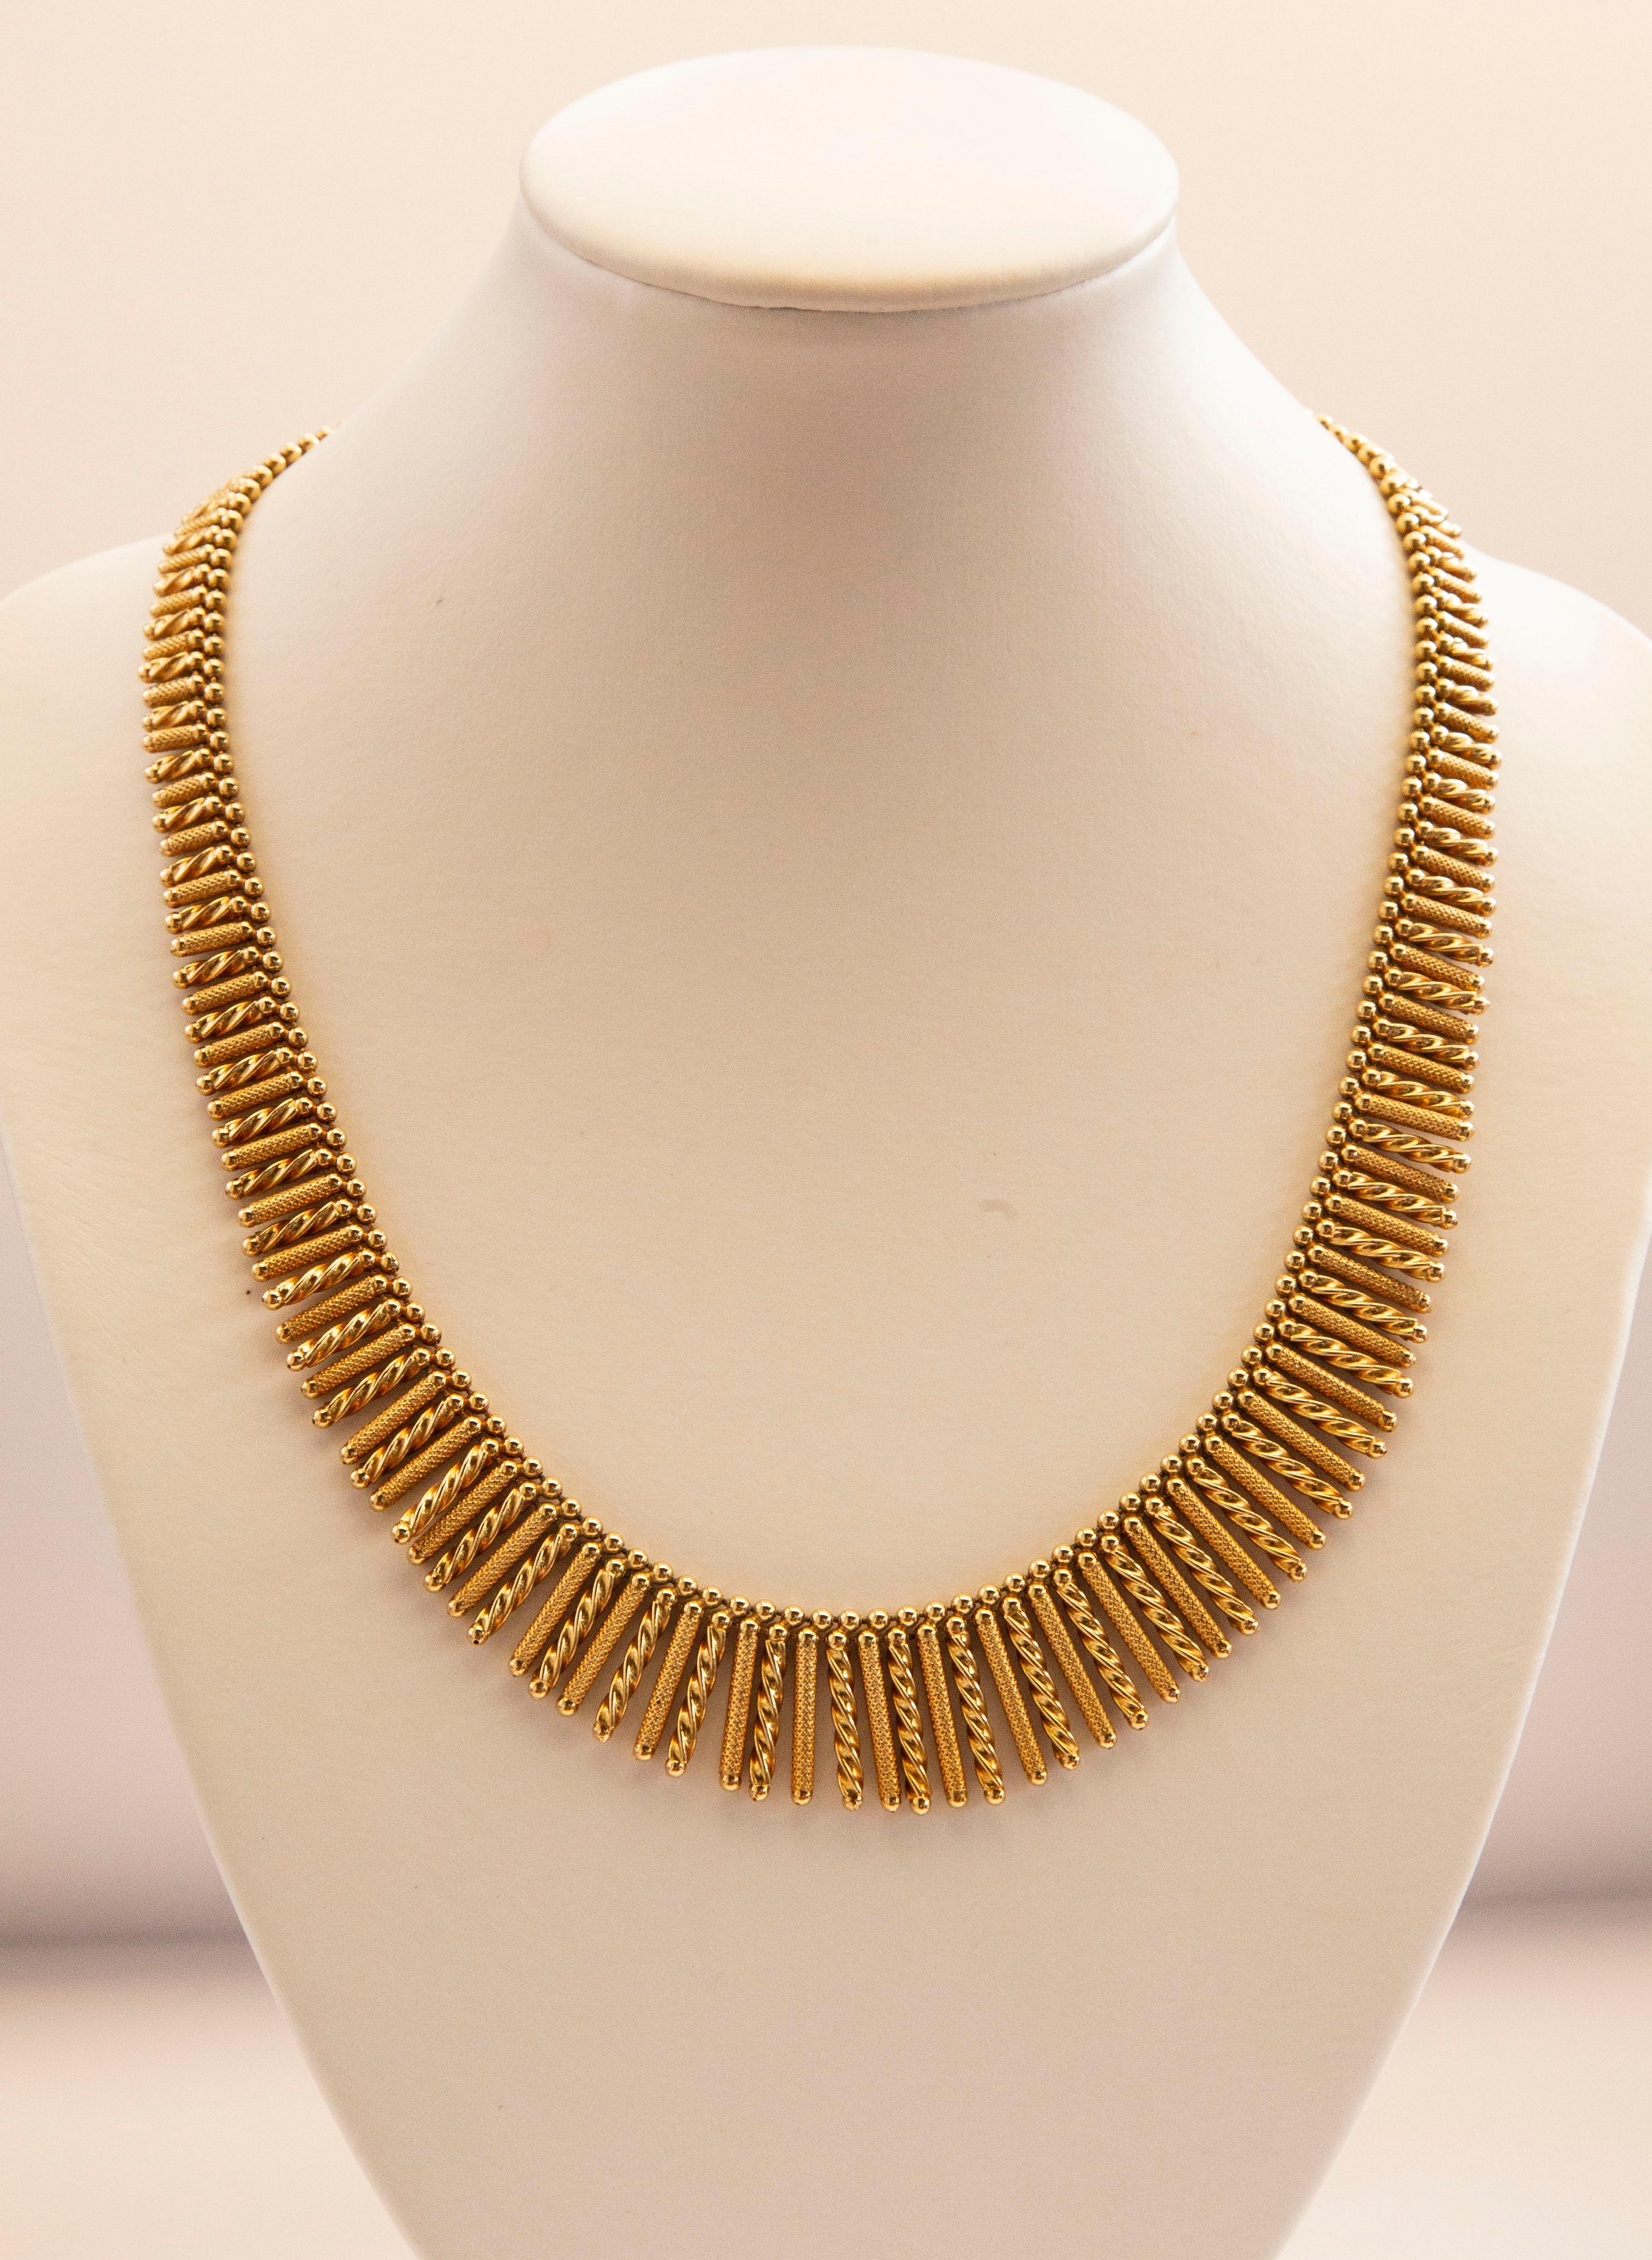 A vintage Italian 18 karat solid yellow gold graduated fringe necklace manufactured by Uno-A-Erre in the 1960s. The necklace consists of textured and twisted open ended rods suspended from a single strand of beads. It has an insert clasp and safety